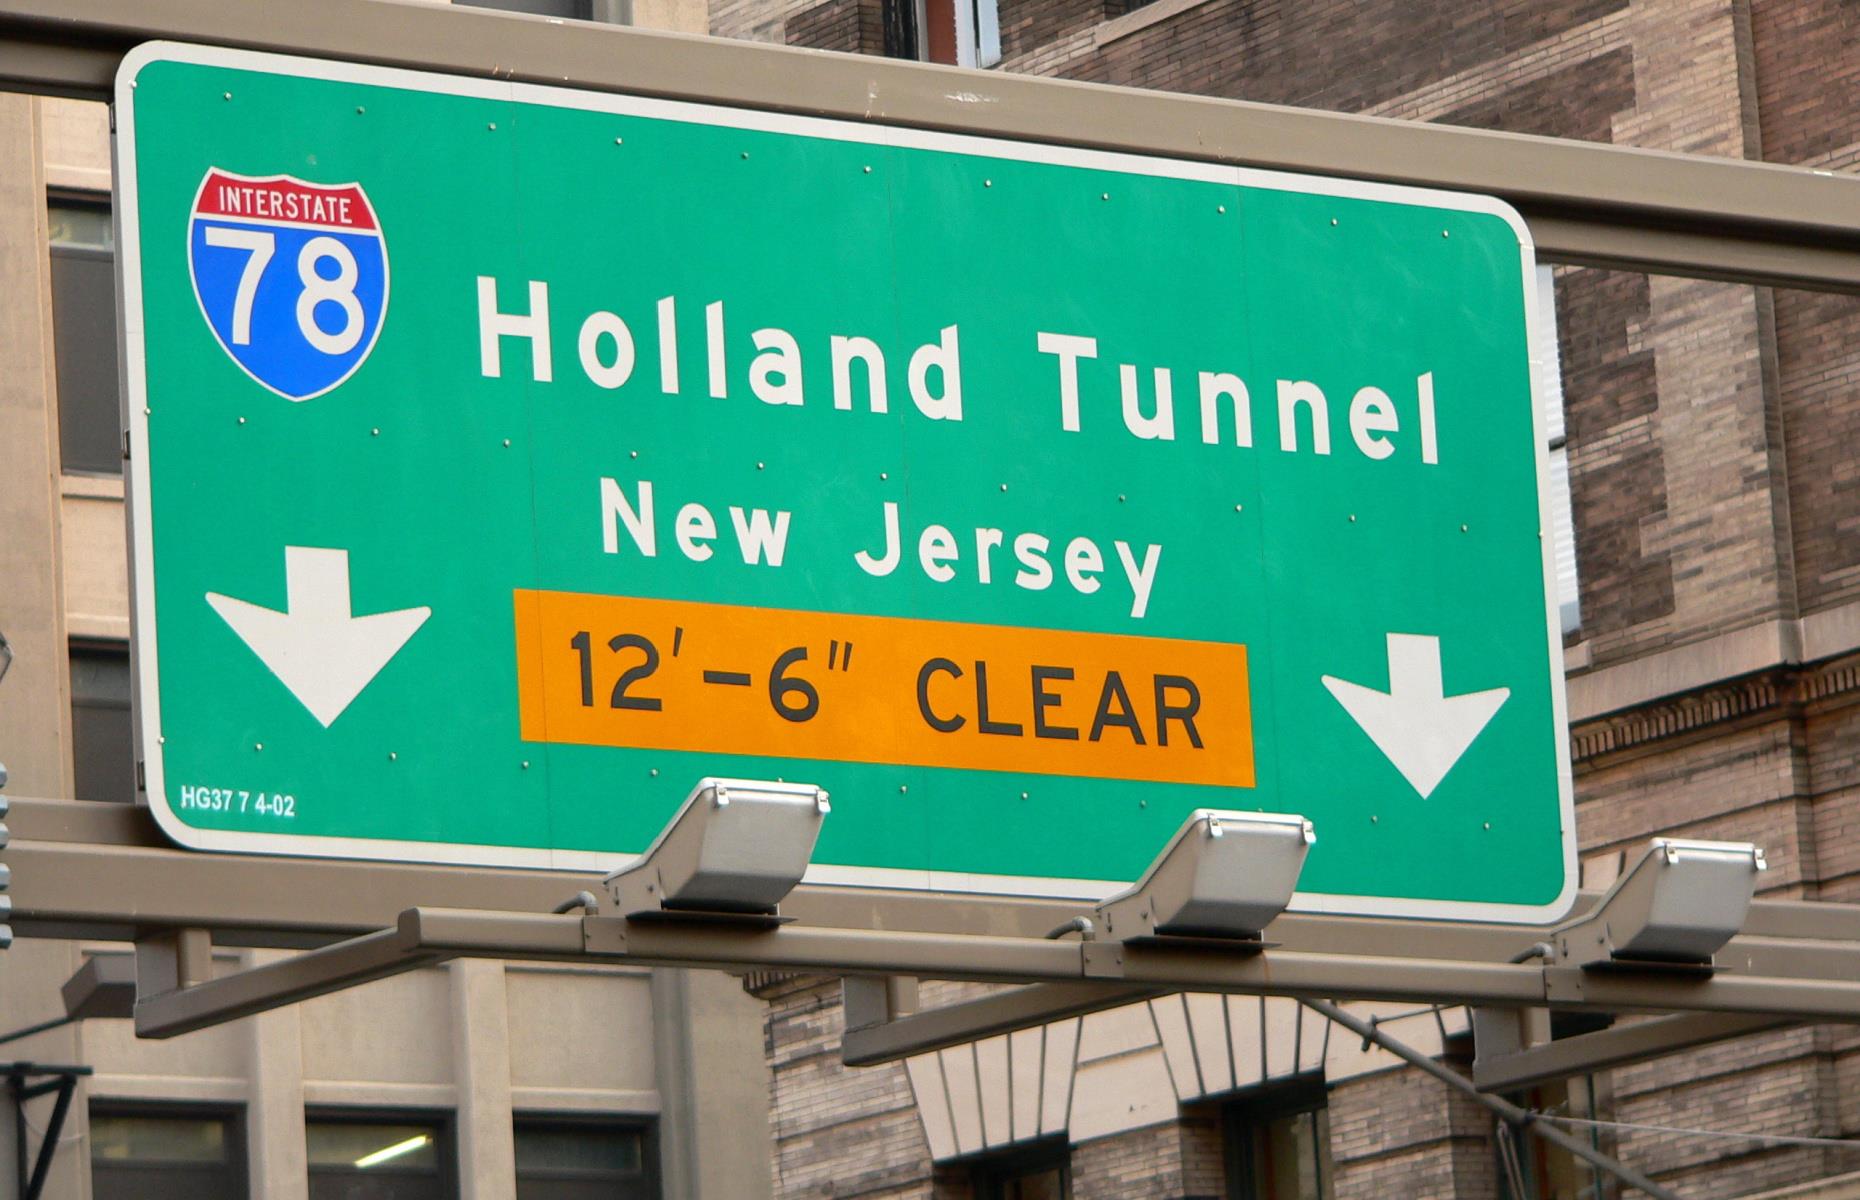 <p>As one of the most well-known pieces of commuter infrastructure in the country, the Holland Tunnel, which connects Jersey City and Manhattan, might seem like an odd addition to the National Register. But the tunnel’s historic value lies in its longevity (it was built in the 1920s) and the scope of the project. Constructing a tunnel under the Hudson River was no small feat at the time, but as the world’s first mechanically ventilated tunnel, it was really an incredible achievement in engineering.</p>